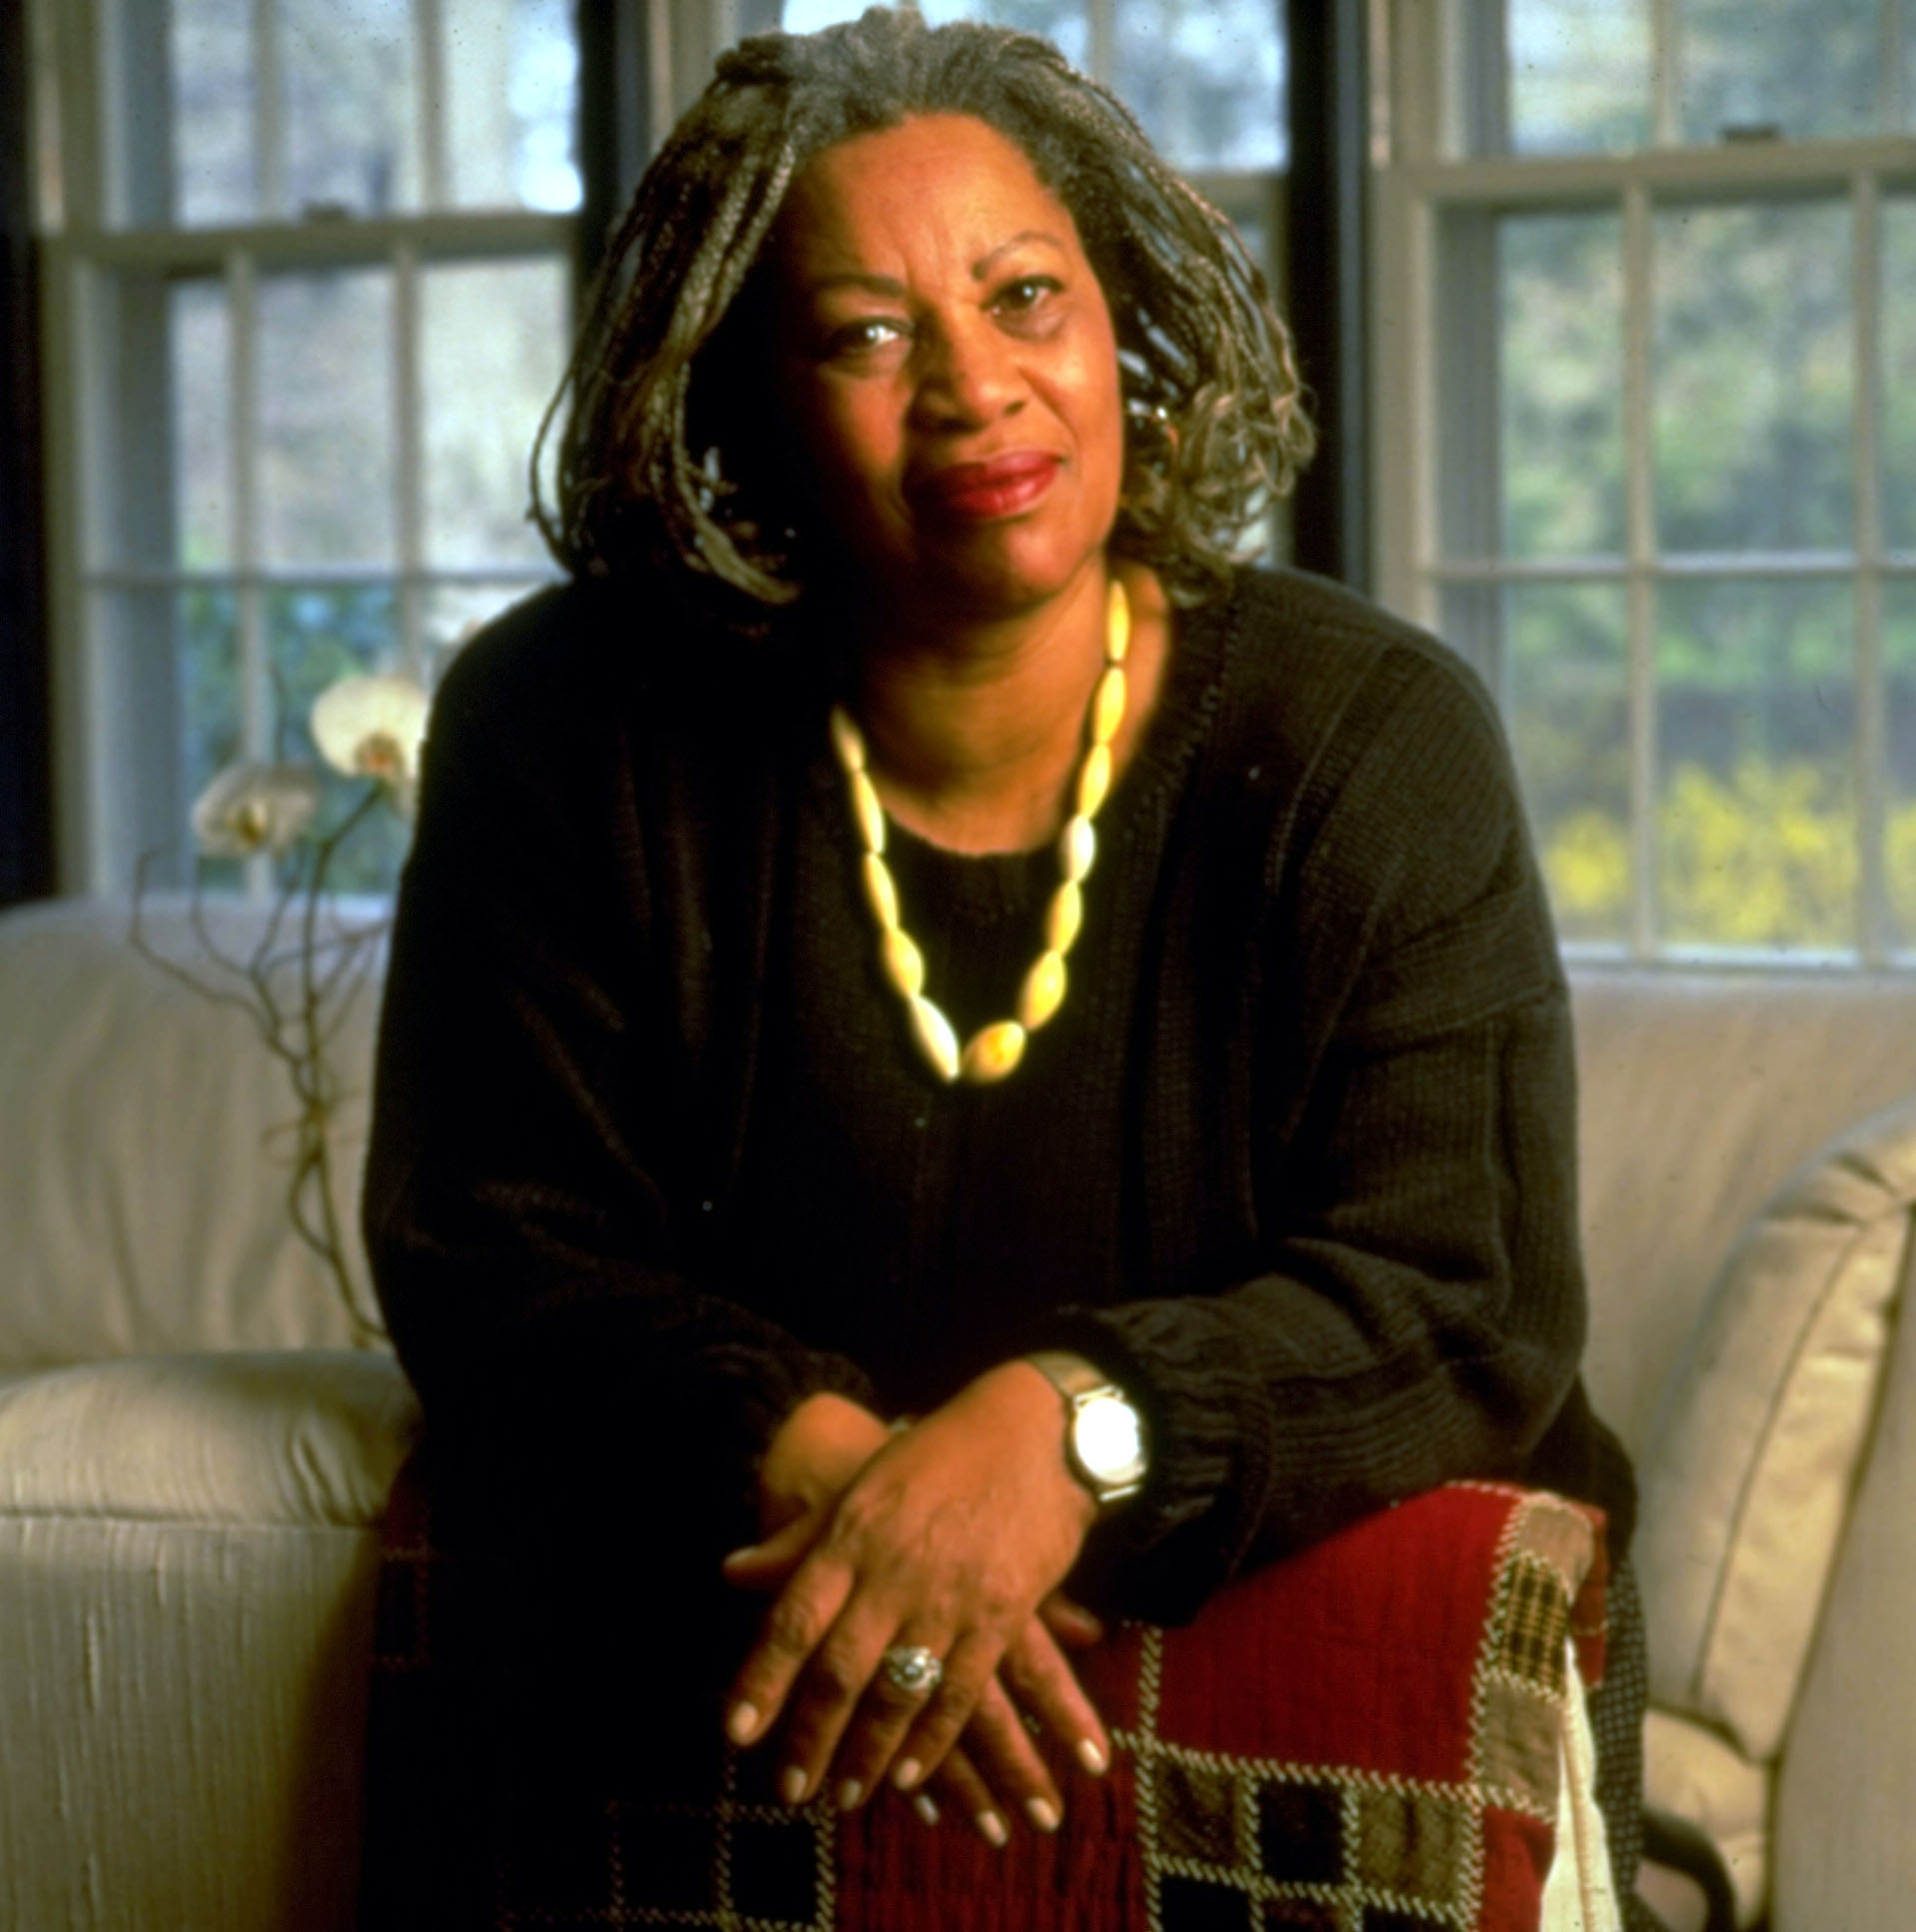 <p>In 1993, author Toni Morrison became the first African American and eighth woman to win the prestigious Nobel Prize for Literature.</p>